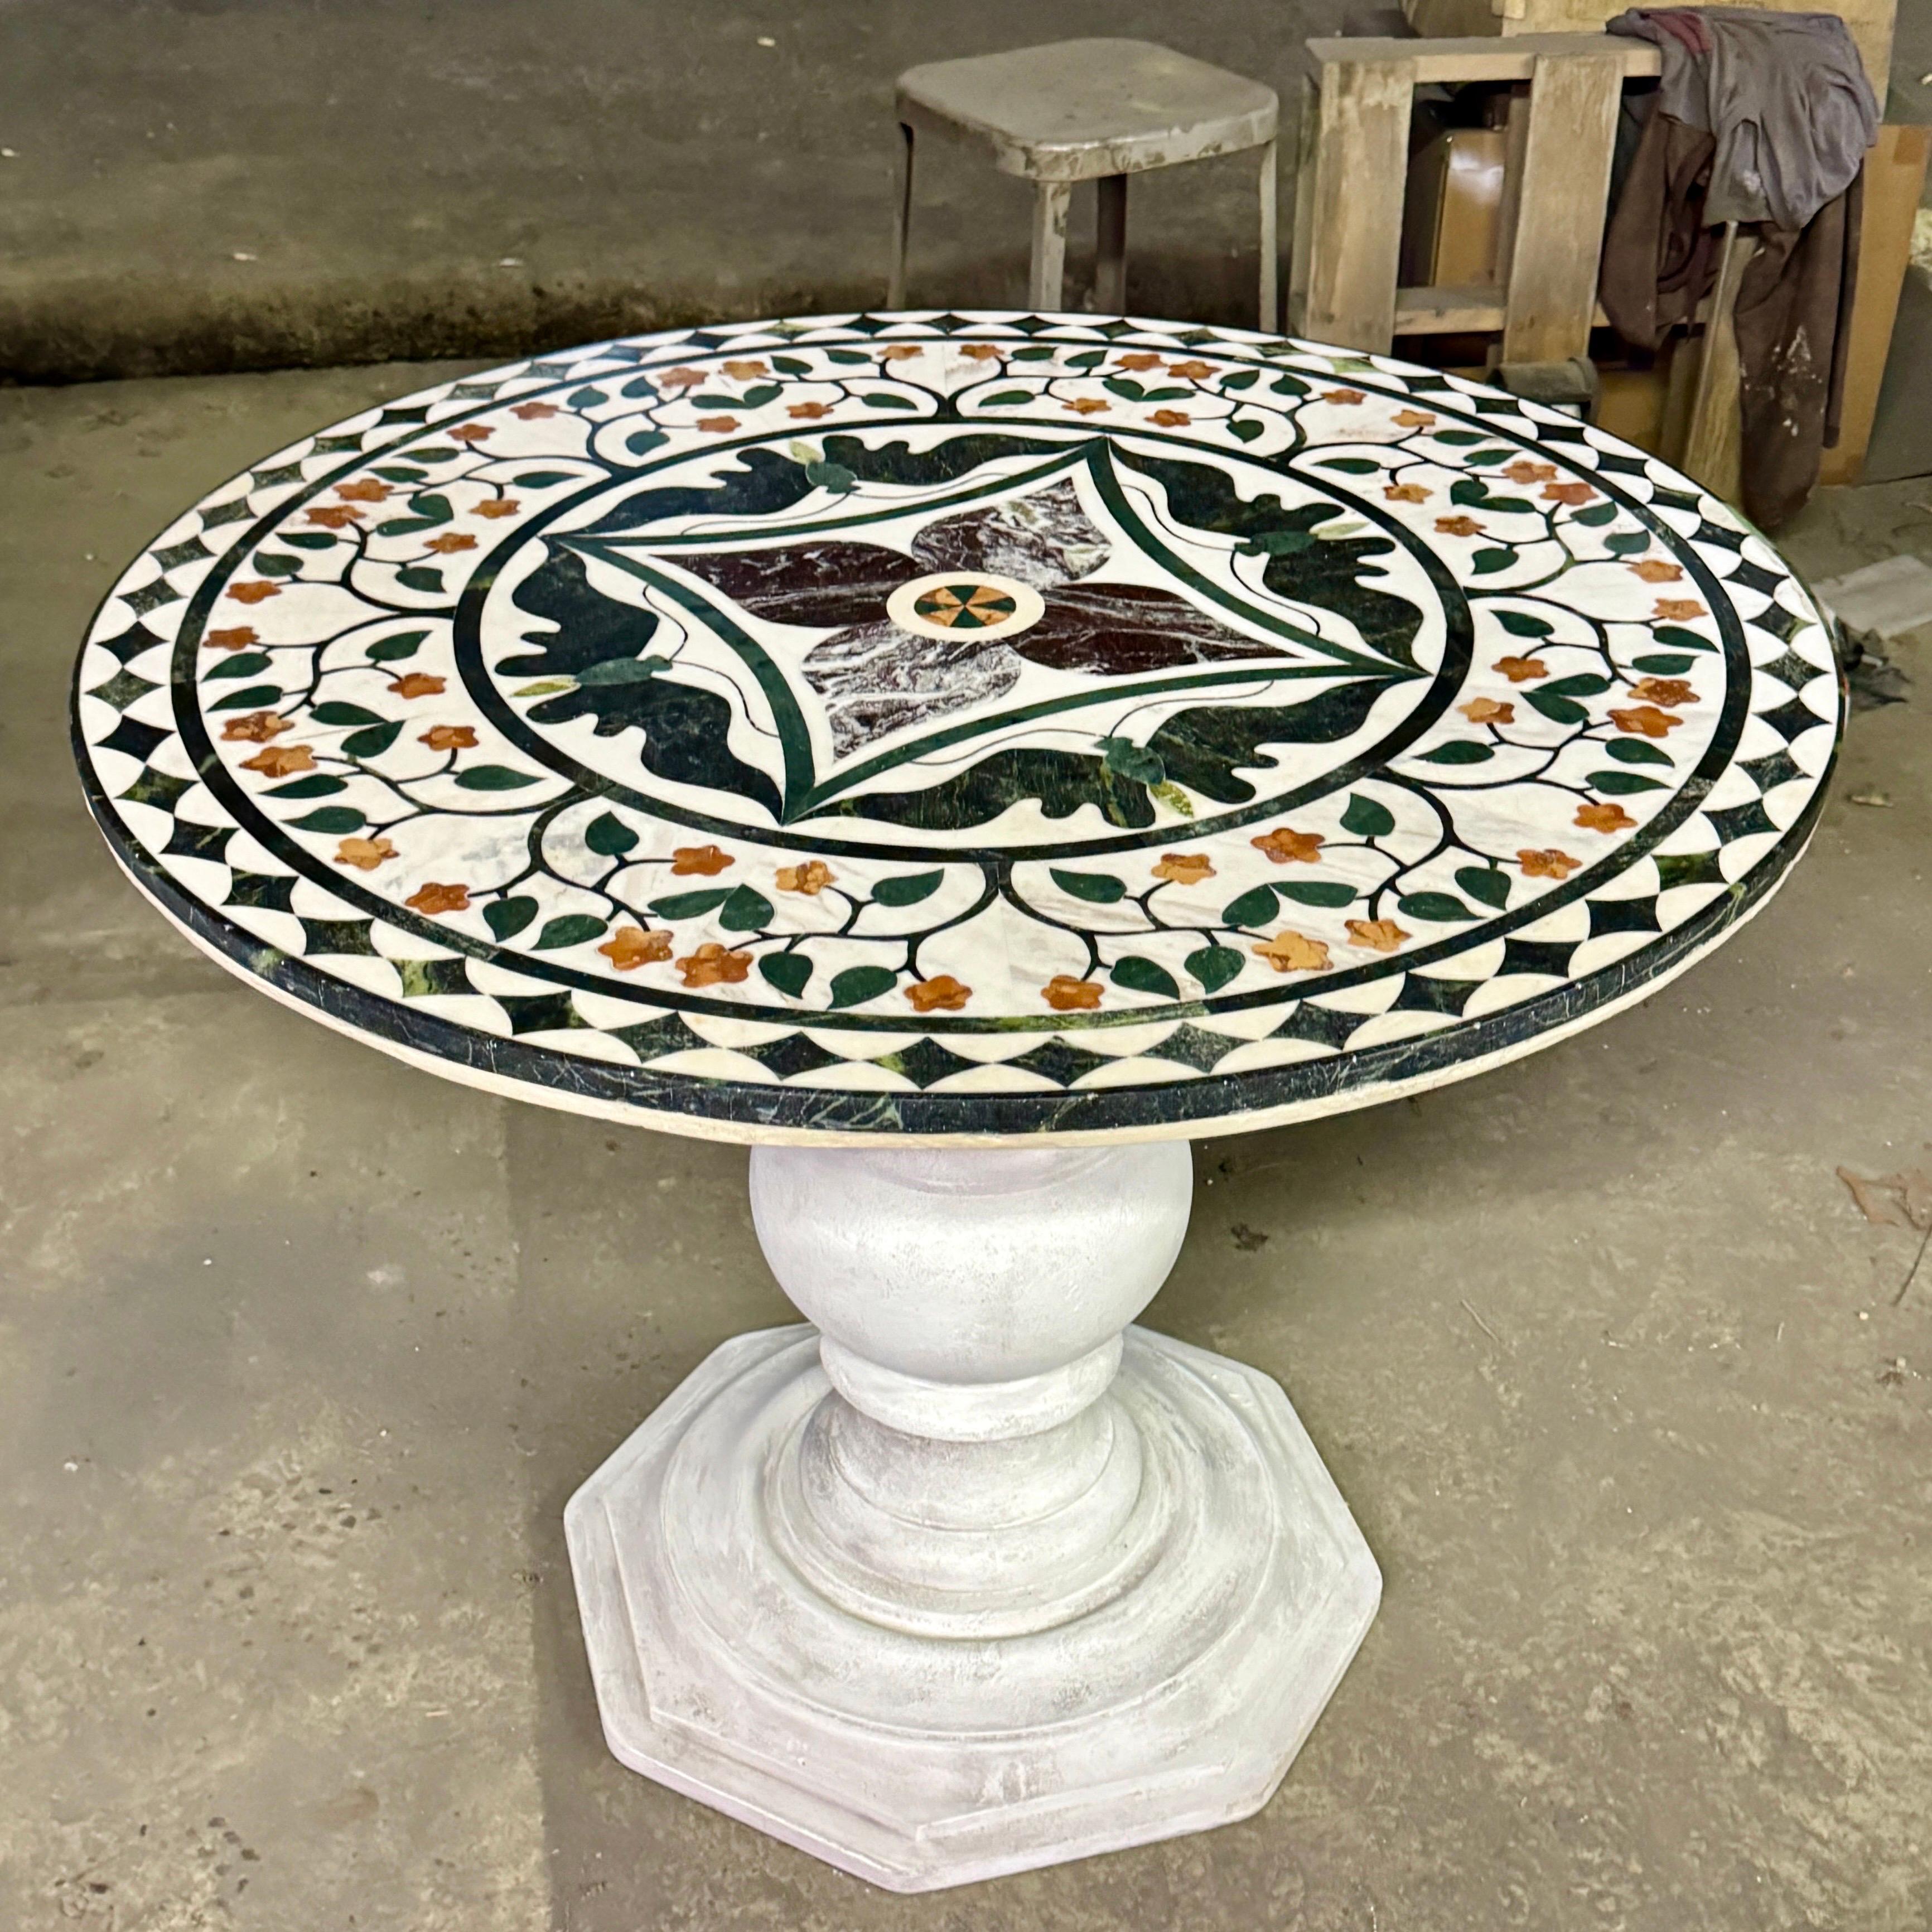 Pietra Dura Inlaid Marble Baroque Style Painted Center Hall Table, Italy.

This stylish round marble table on a solid painted wood base is the perfect addition to any home. Crafted from high-quality inlaid marble, this table is sure to last for